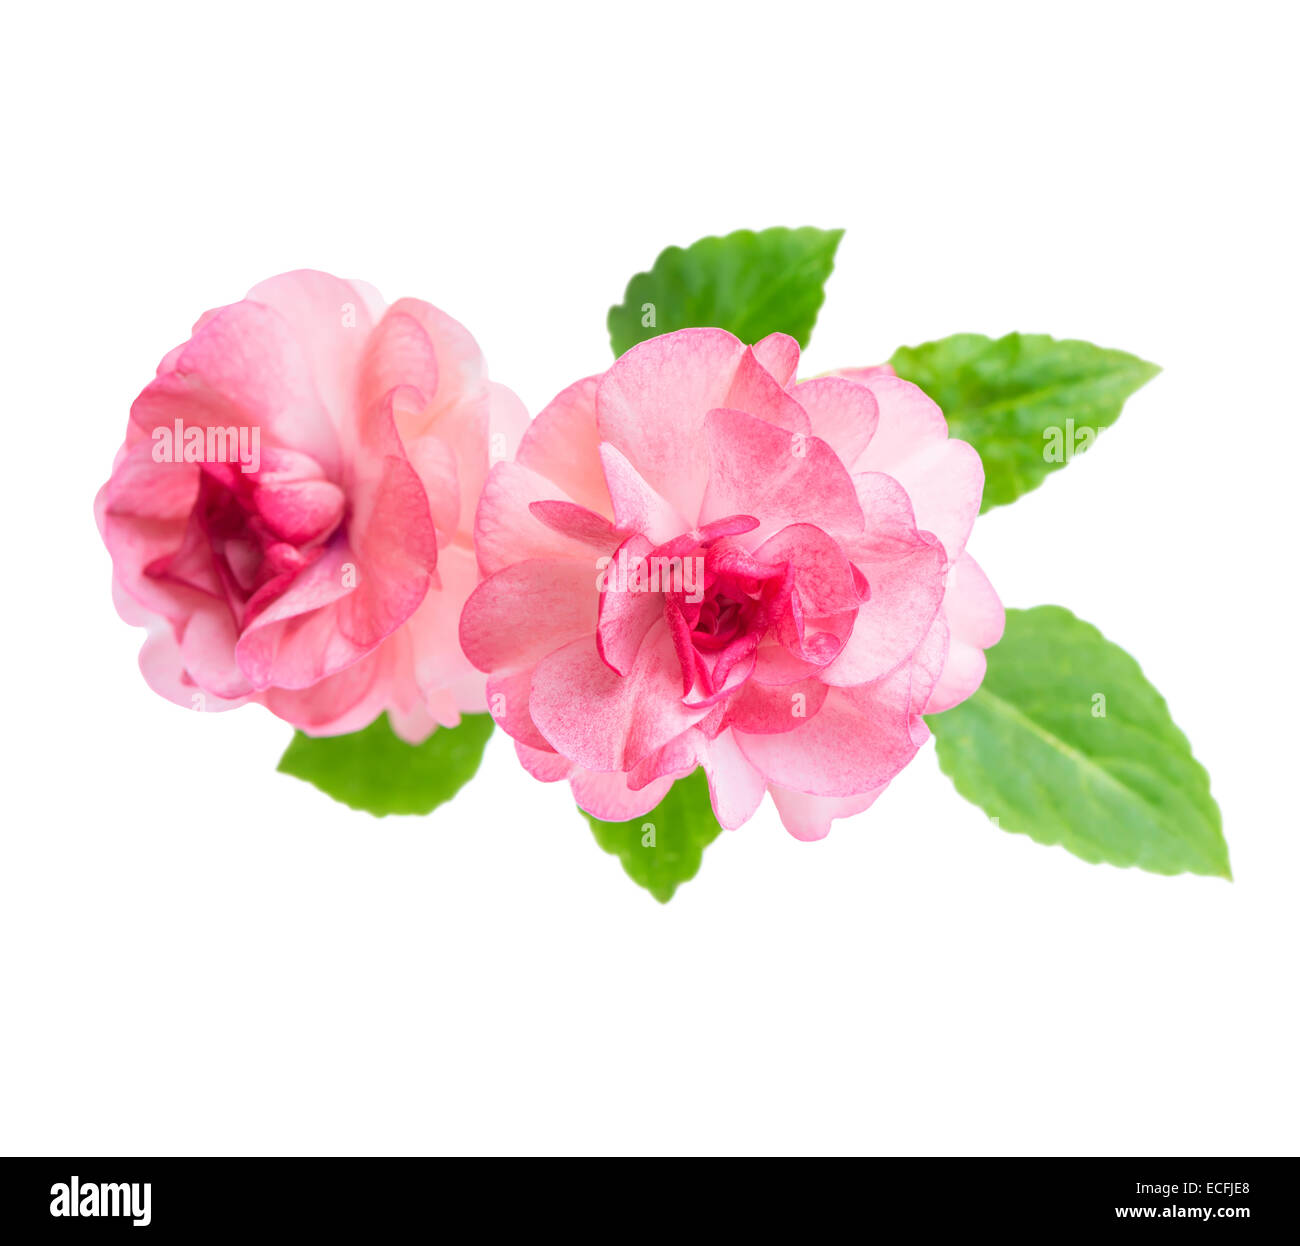 blooming beautiful pink Impatiens flowers is isolated on white background, closeup Stock Photo